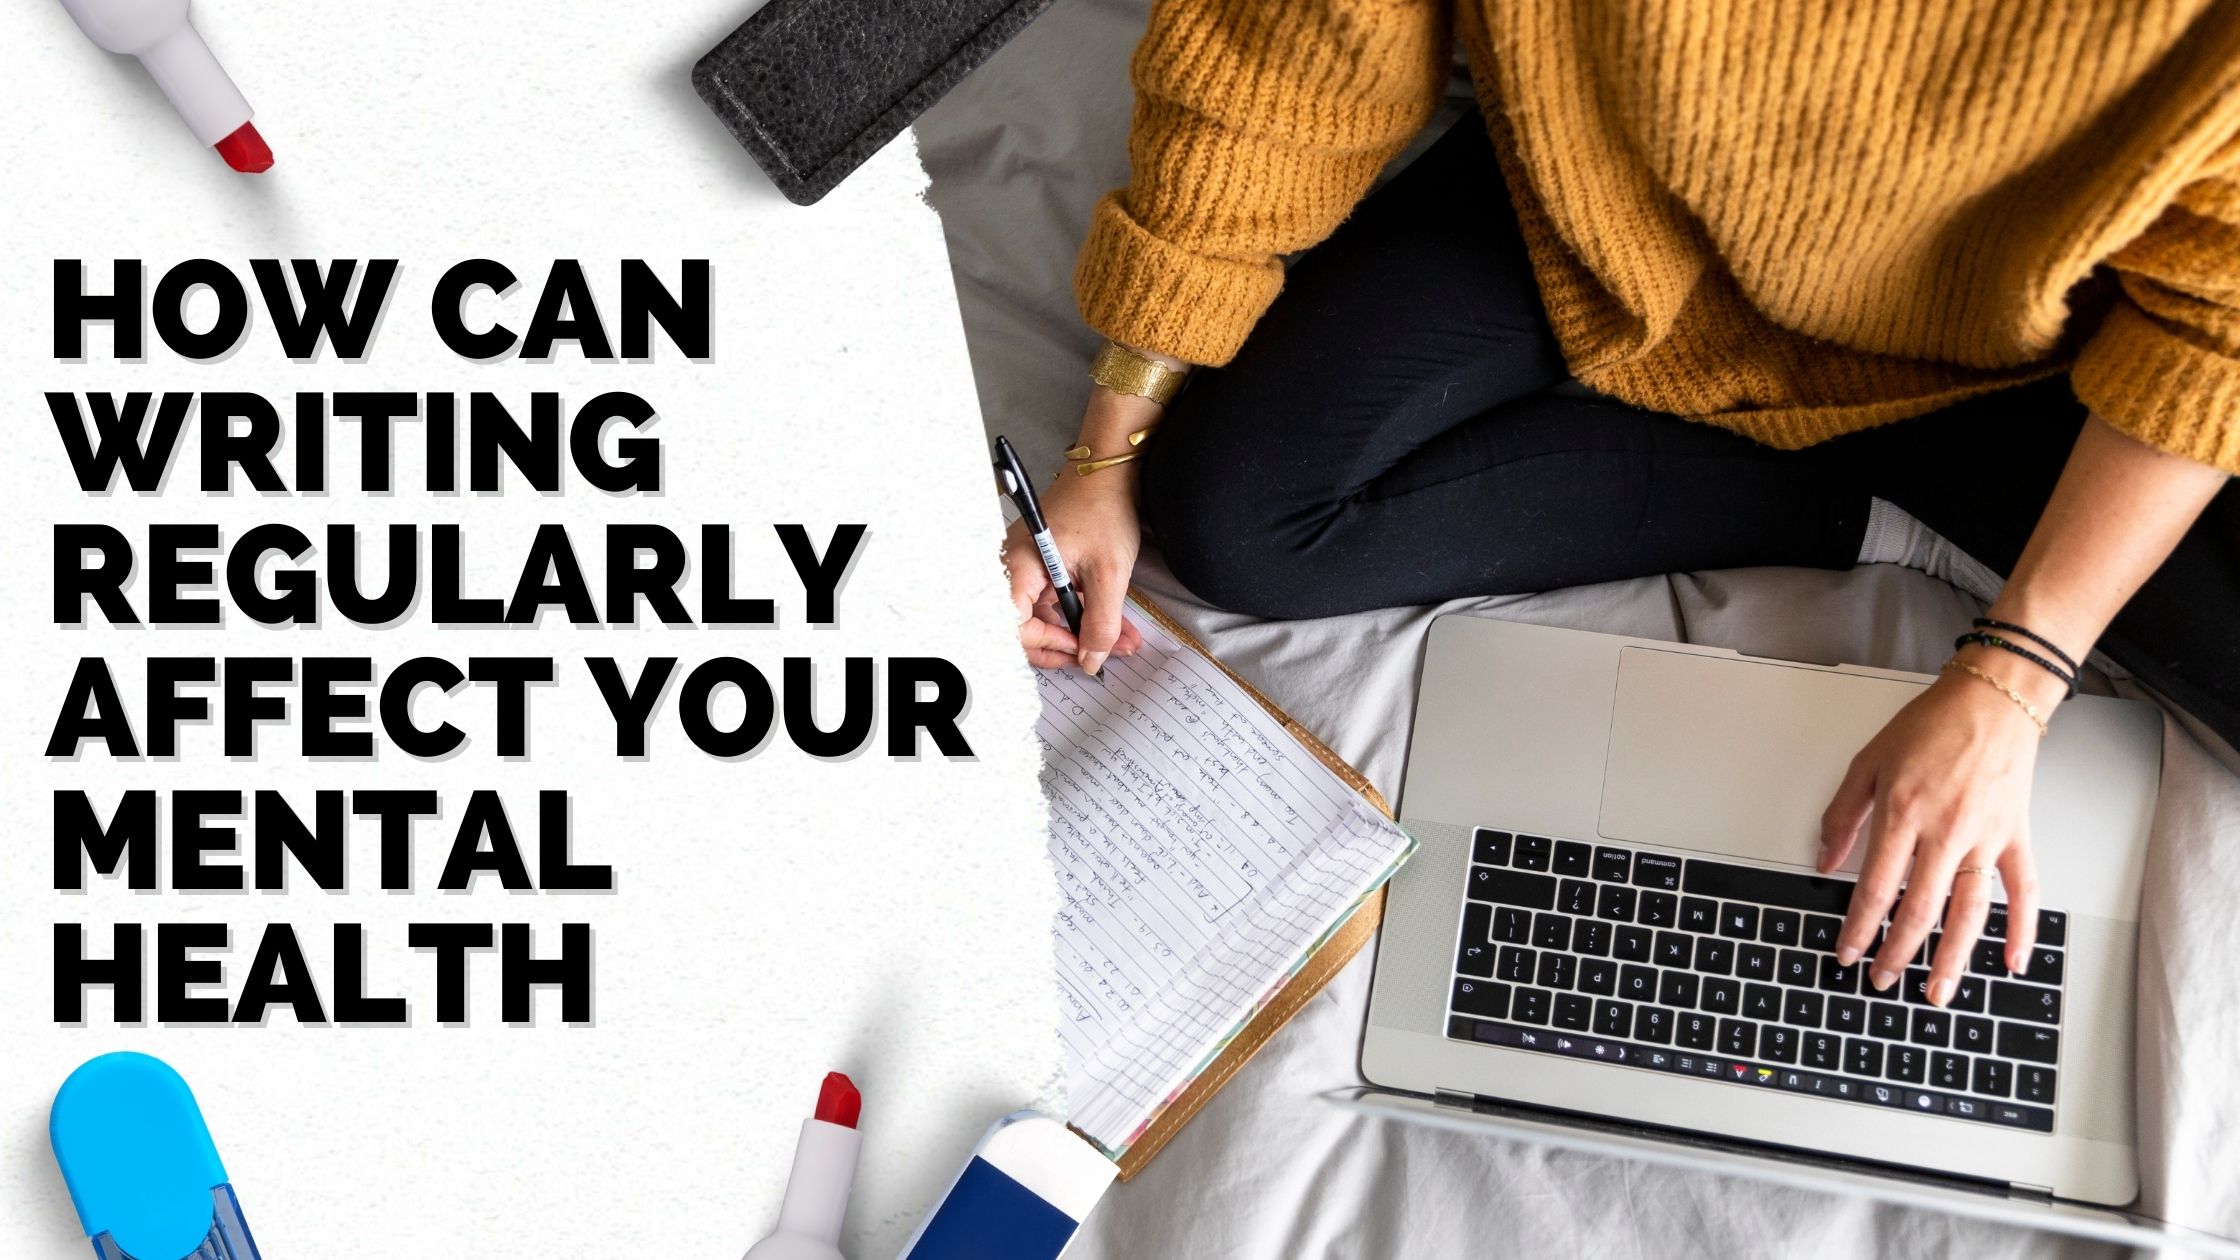 How can writing regularly affect your mental health